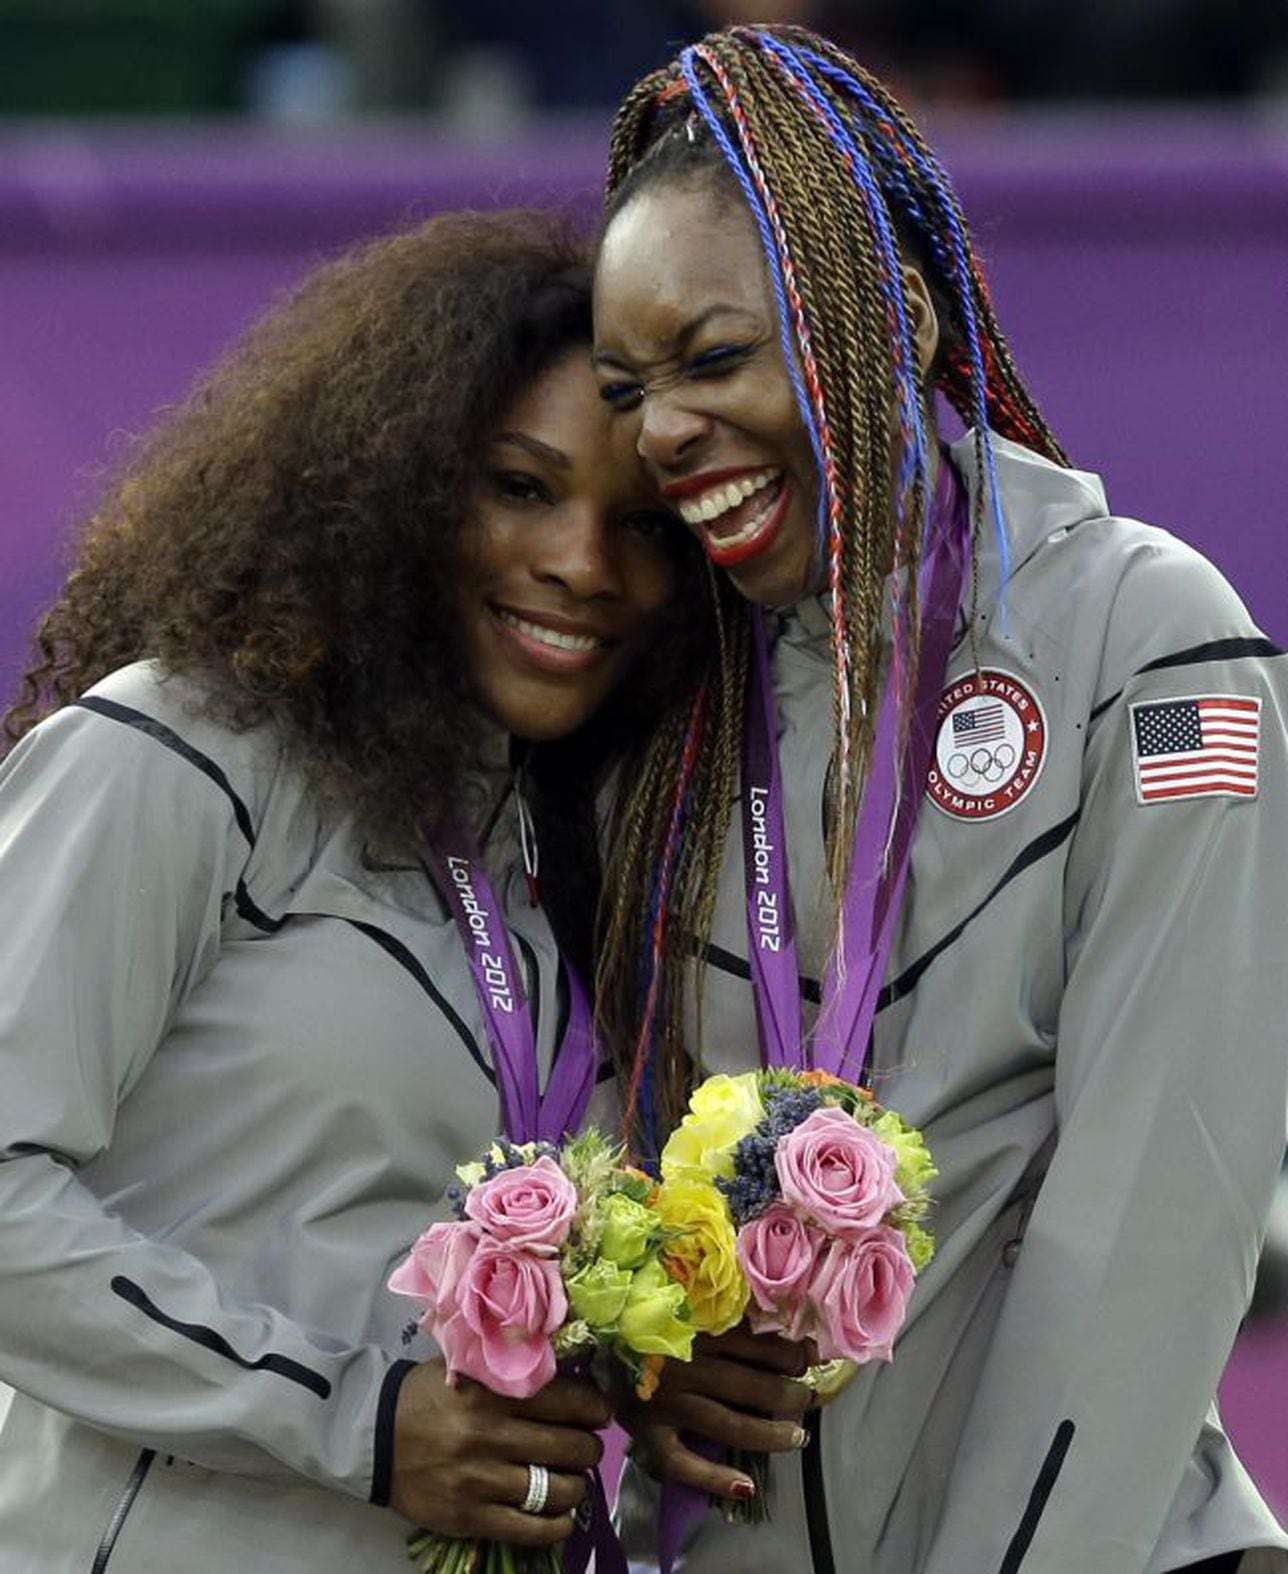 What US tennis players have won the most Olympic medals? Full list of